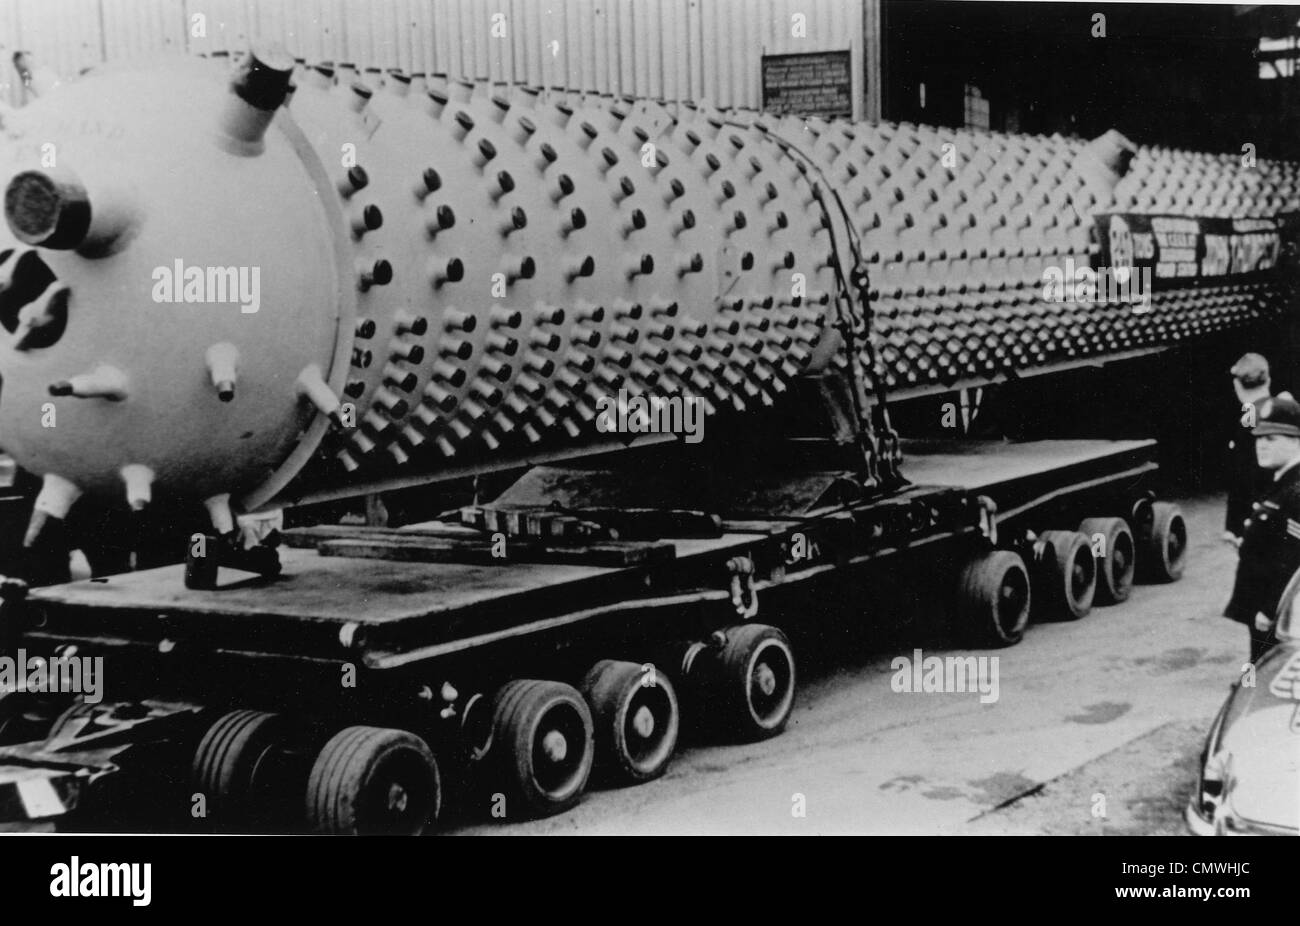 Boiler, John Thompson (Wolverhampton) Ltd. Wolverhampton, Mid 20th cent. A  240 ton boiler being transported from the works. Its Stock Photo - Alamy